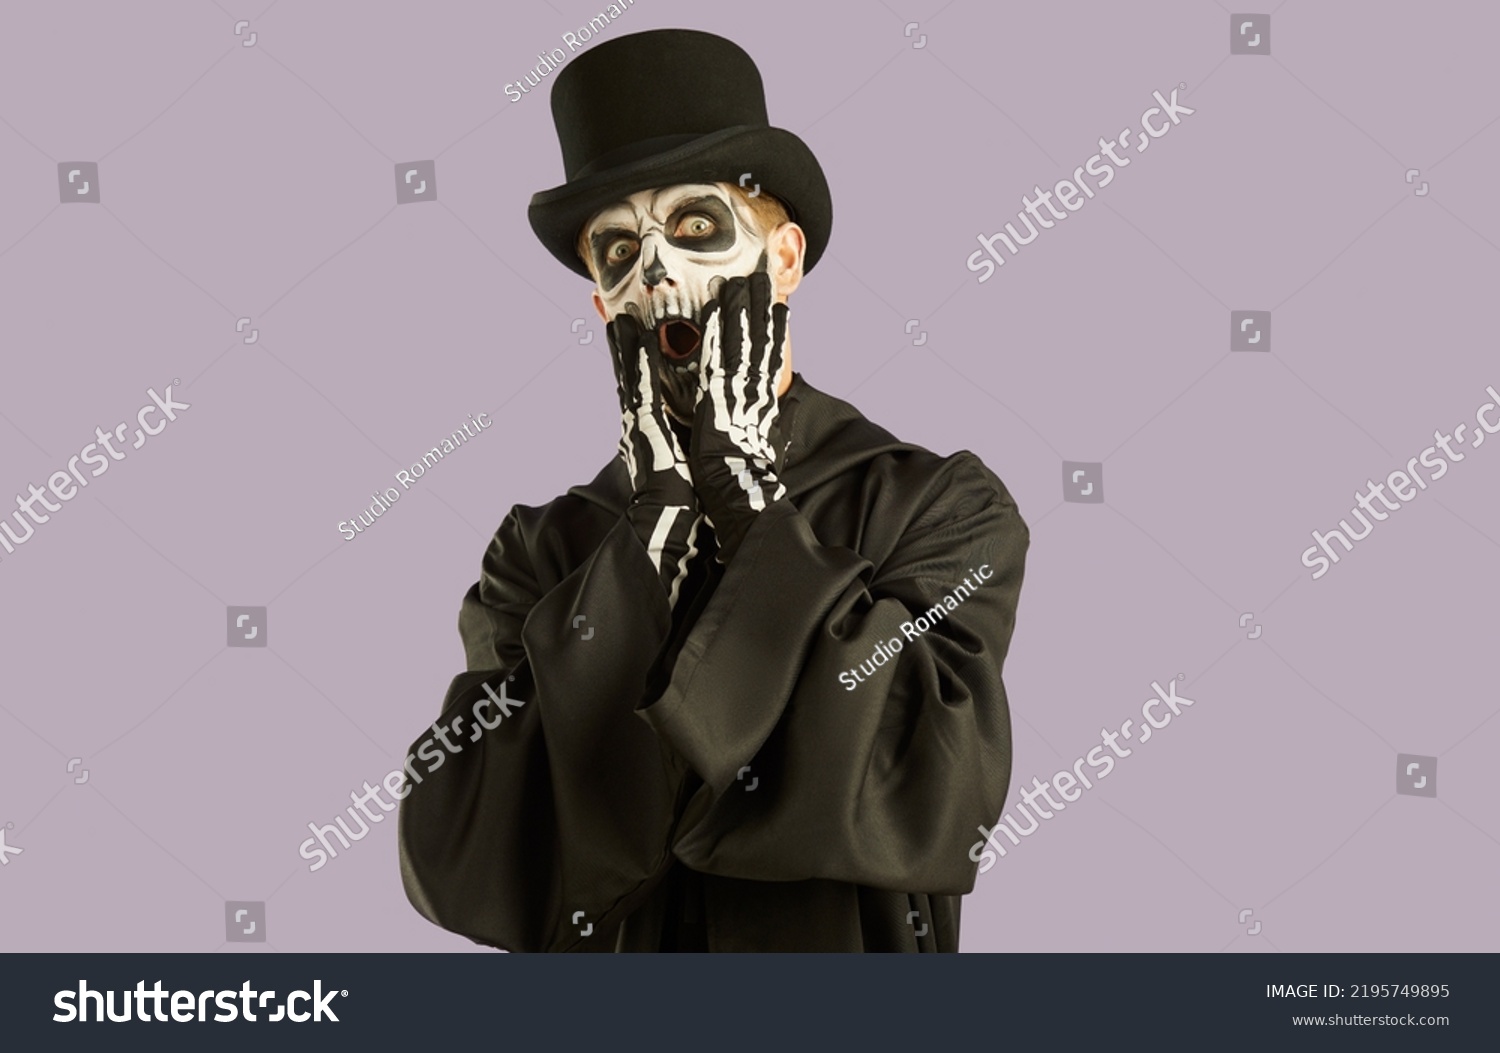 Portrait of shocked man in Halloween make-up and costume grabbing his face in fright. Man in black hat, suit and skull make-up opens his eyes and mouth wide in fear on light lilac background. #2195749895